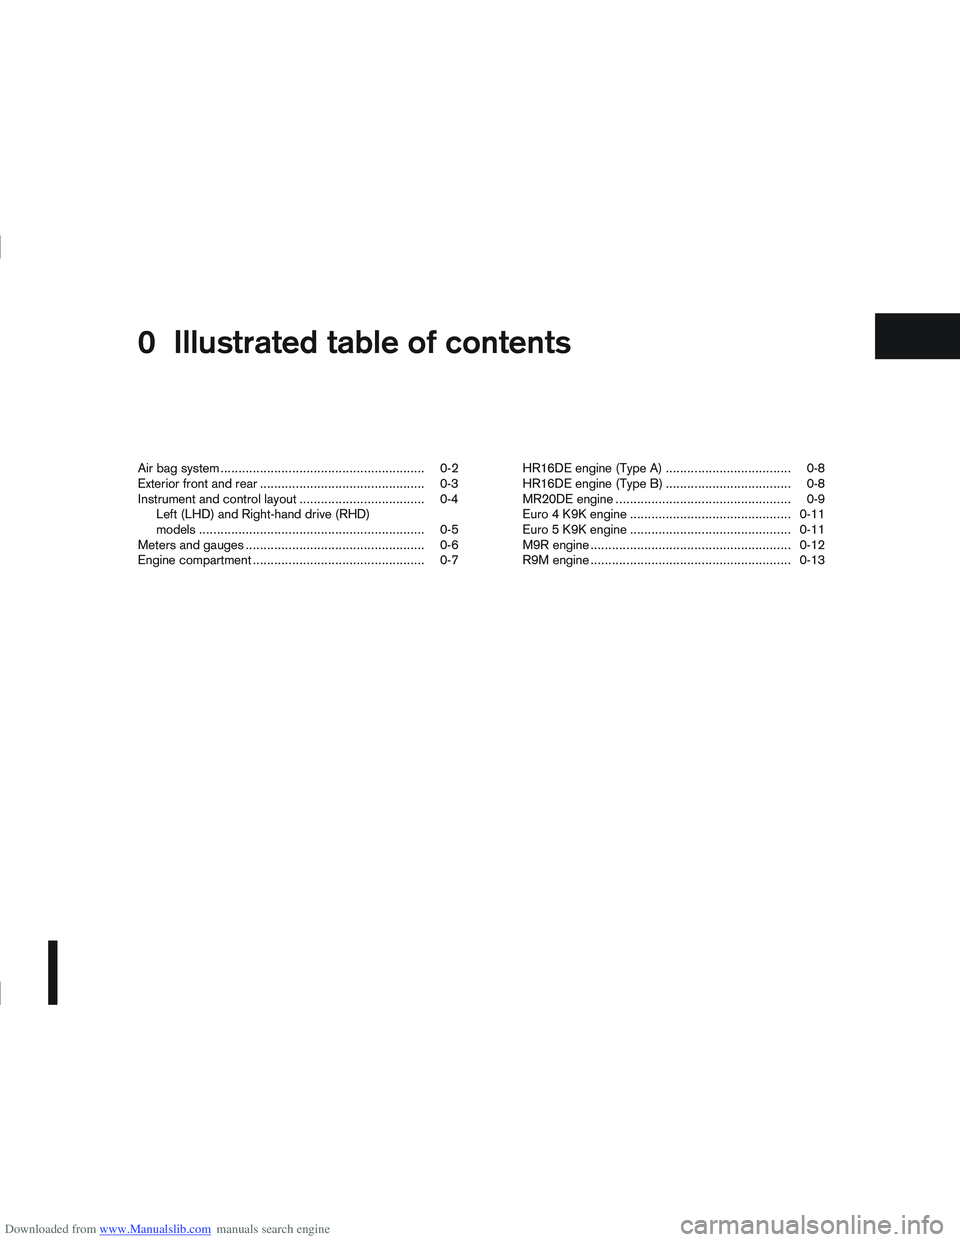 NISSAN QASHQAI 2012  Owners Manual Downloaded from www.Manualslib.com manuals search engine 0Illustrated table of contents
Illustrated table of contents
Air bag system ......................................................... 0-2
Exter